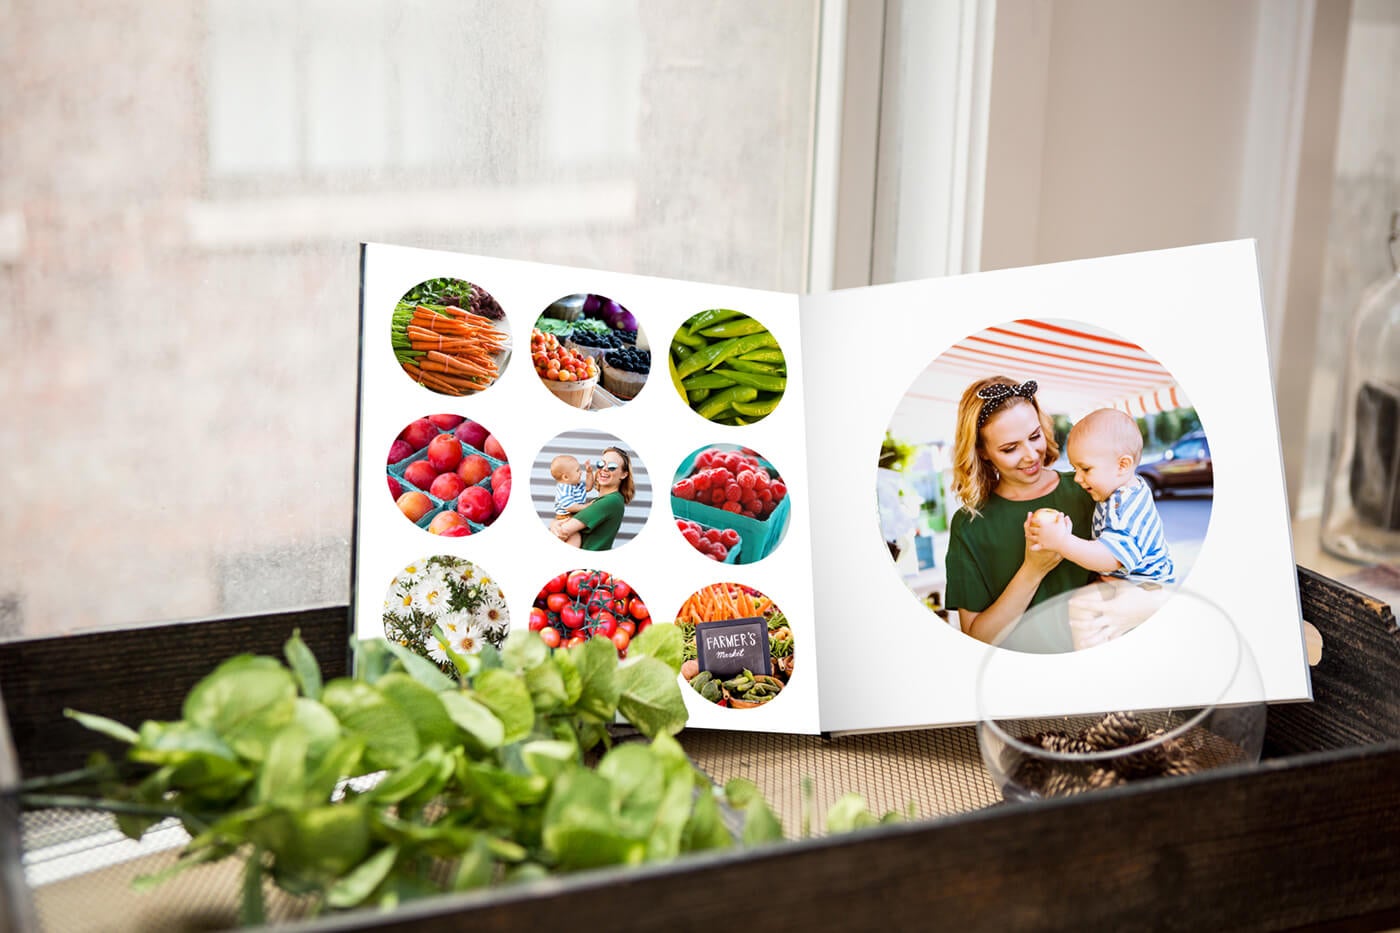 softcover photo book from printique showing farmer's market